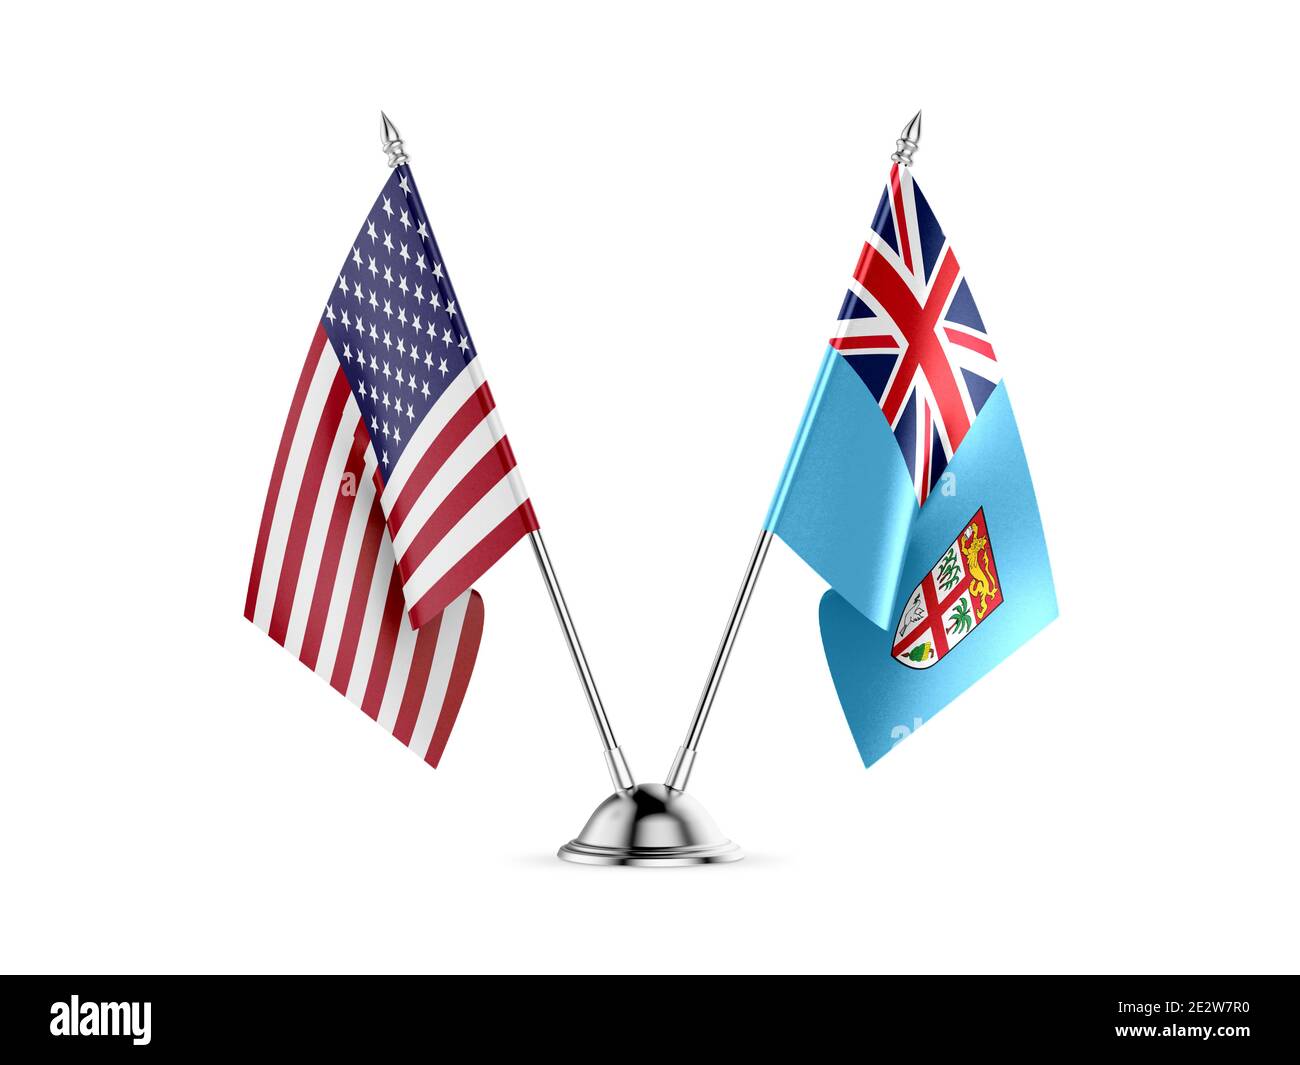 Desk flags, United States  America  and Fiji, isolated on white background. 3d image Stock Photo